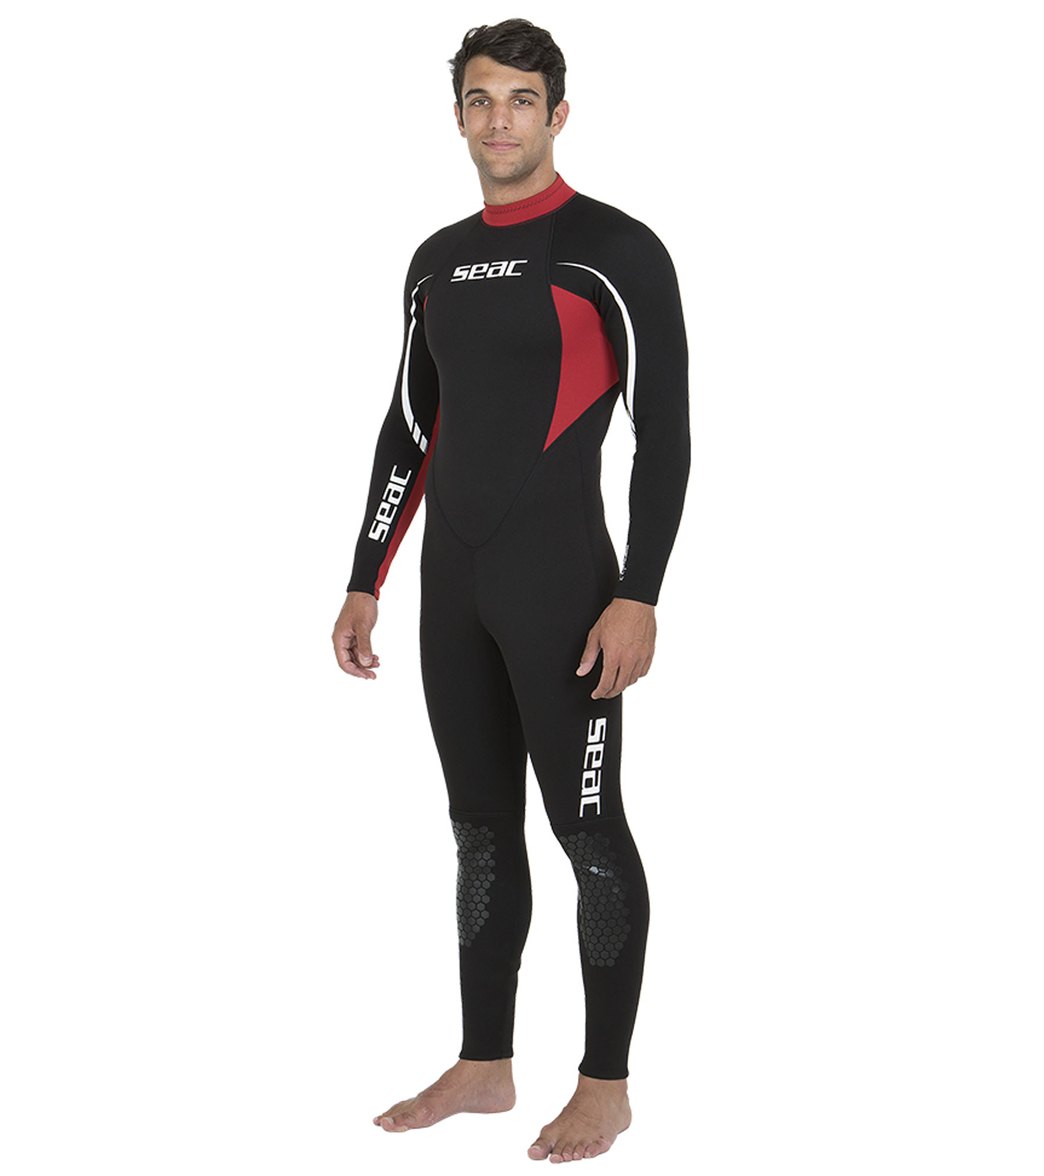 Seac USA Mens 2.2mm Relax Full Wetsuit at SwimOutlet